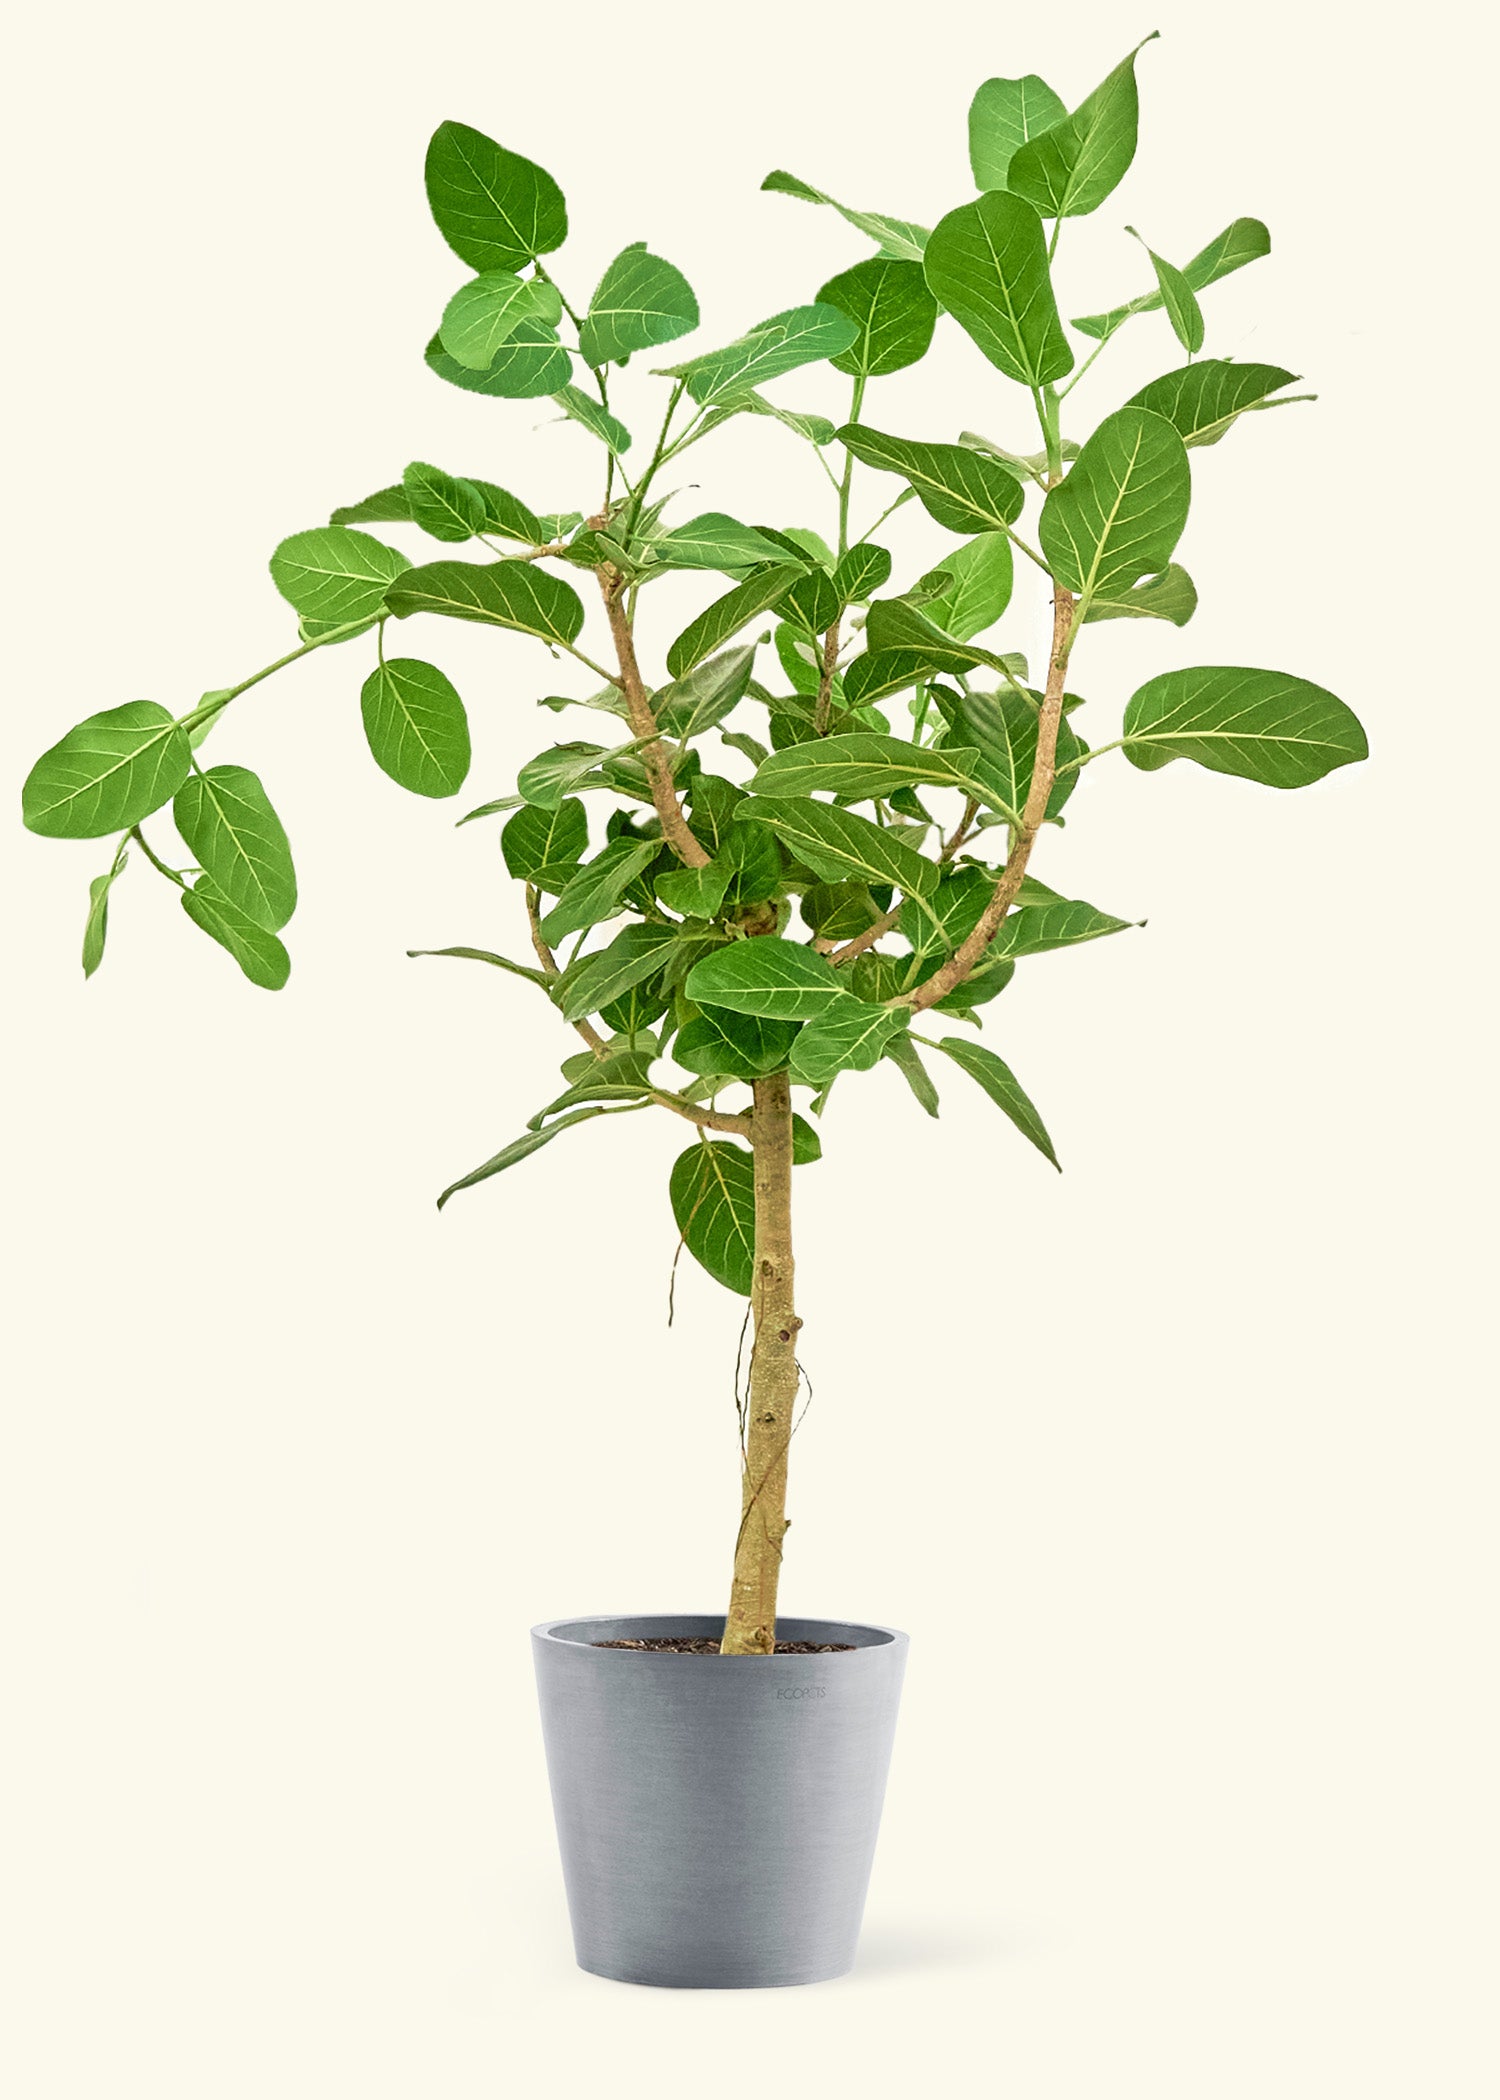 Large Ficus 'Audrey' Plant in a gray stone pot.